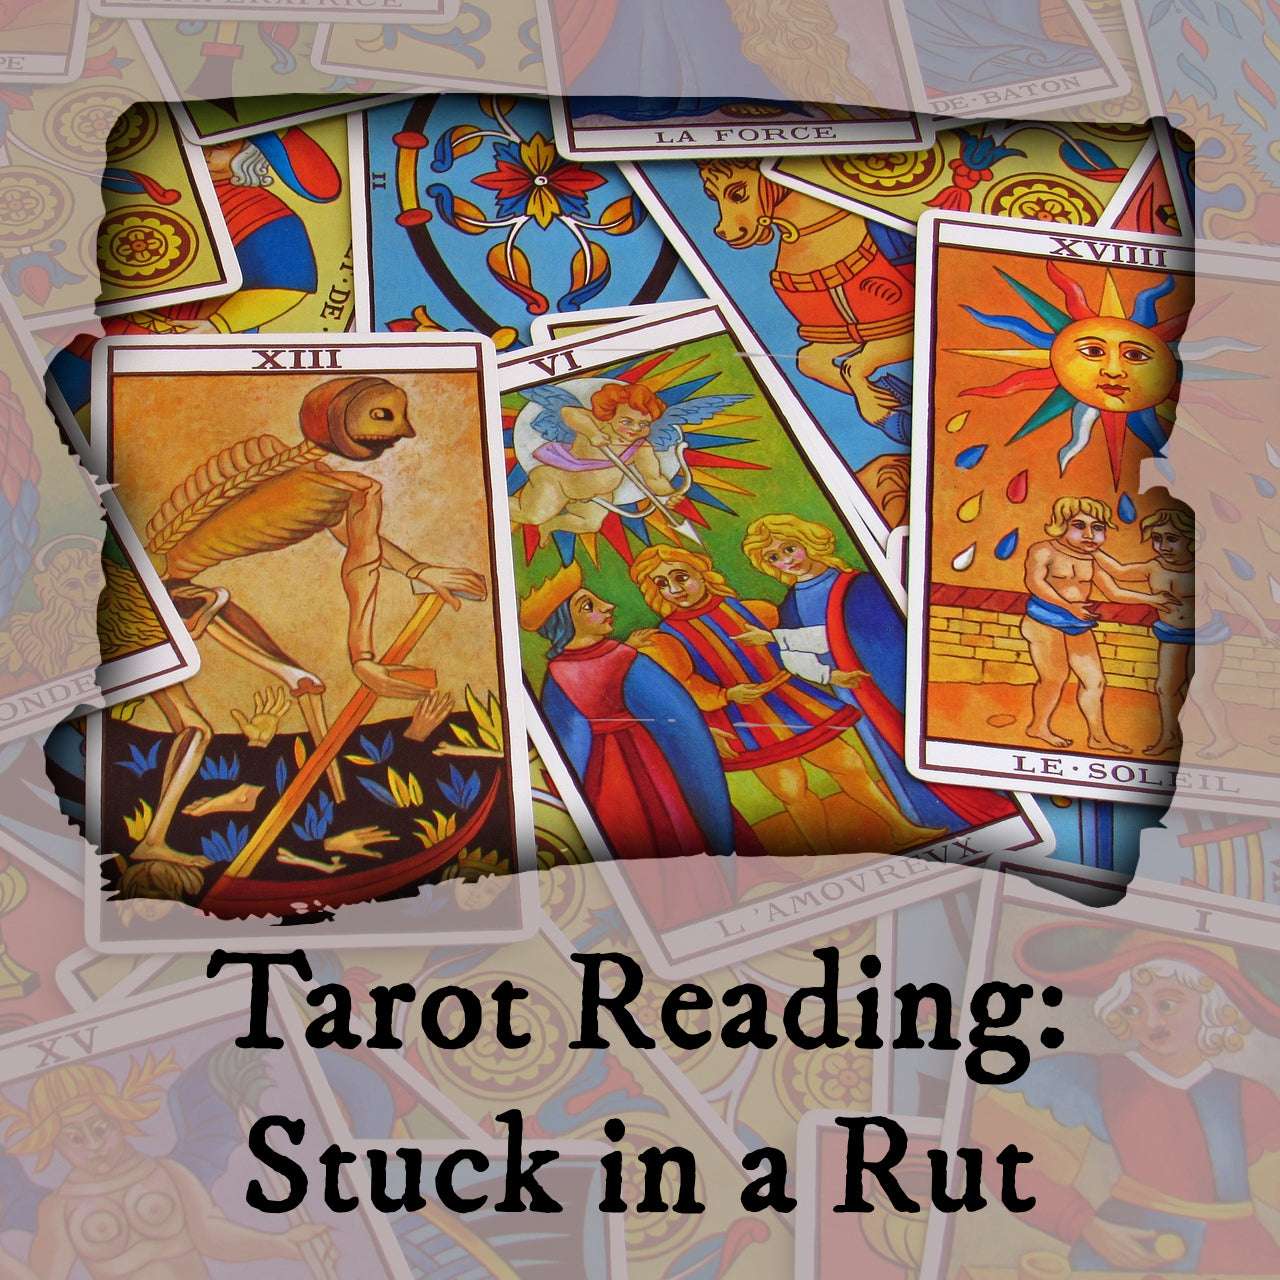 Tarot Reading: Stuck in a Rut - Email